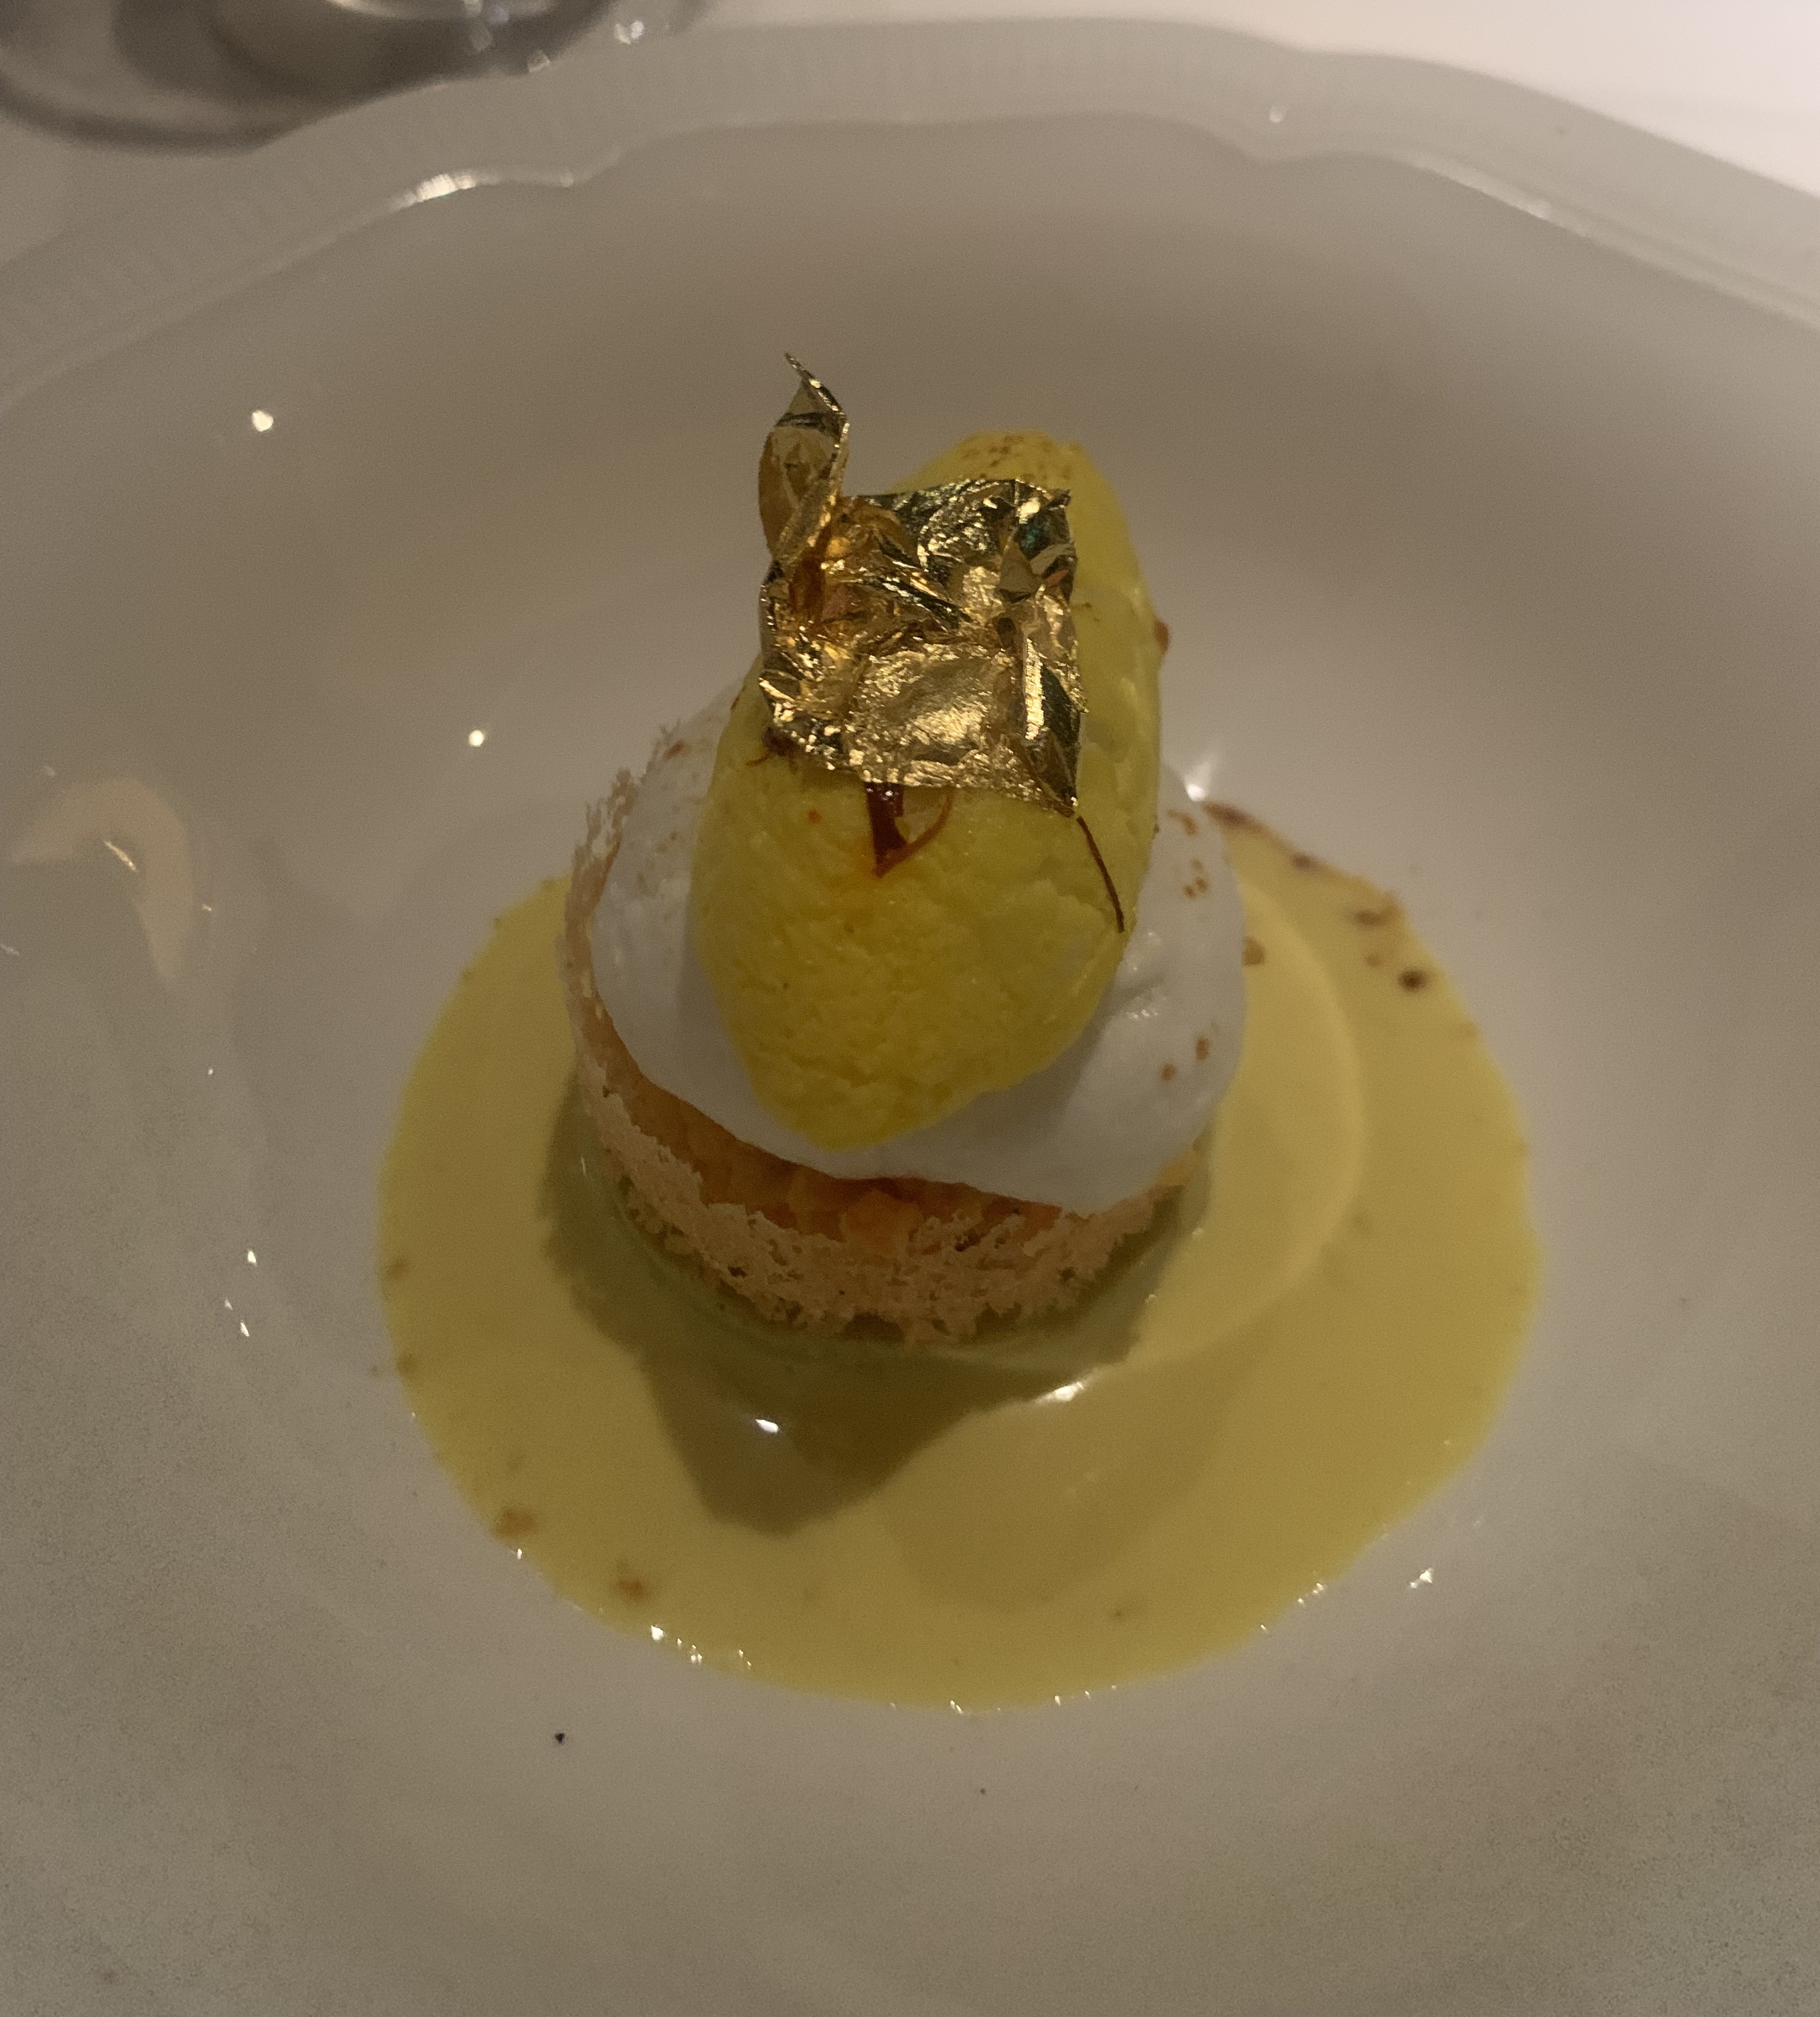 A tower of treats: a delicate shell of pastry on the bottom holding an orange filling, a milk cloud on top of that, and a quenelle of yellow ice cream with golf leaf. Around the shell is a smooth, yellow sauce.